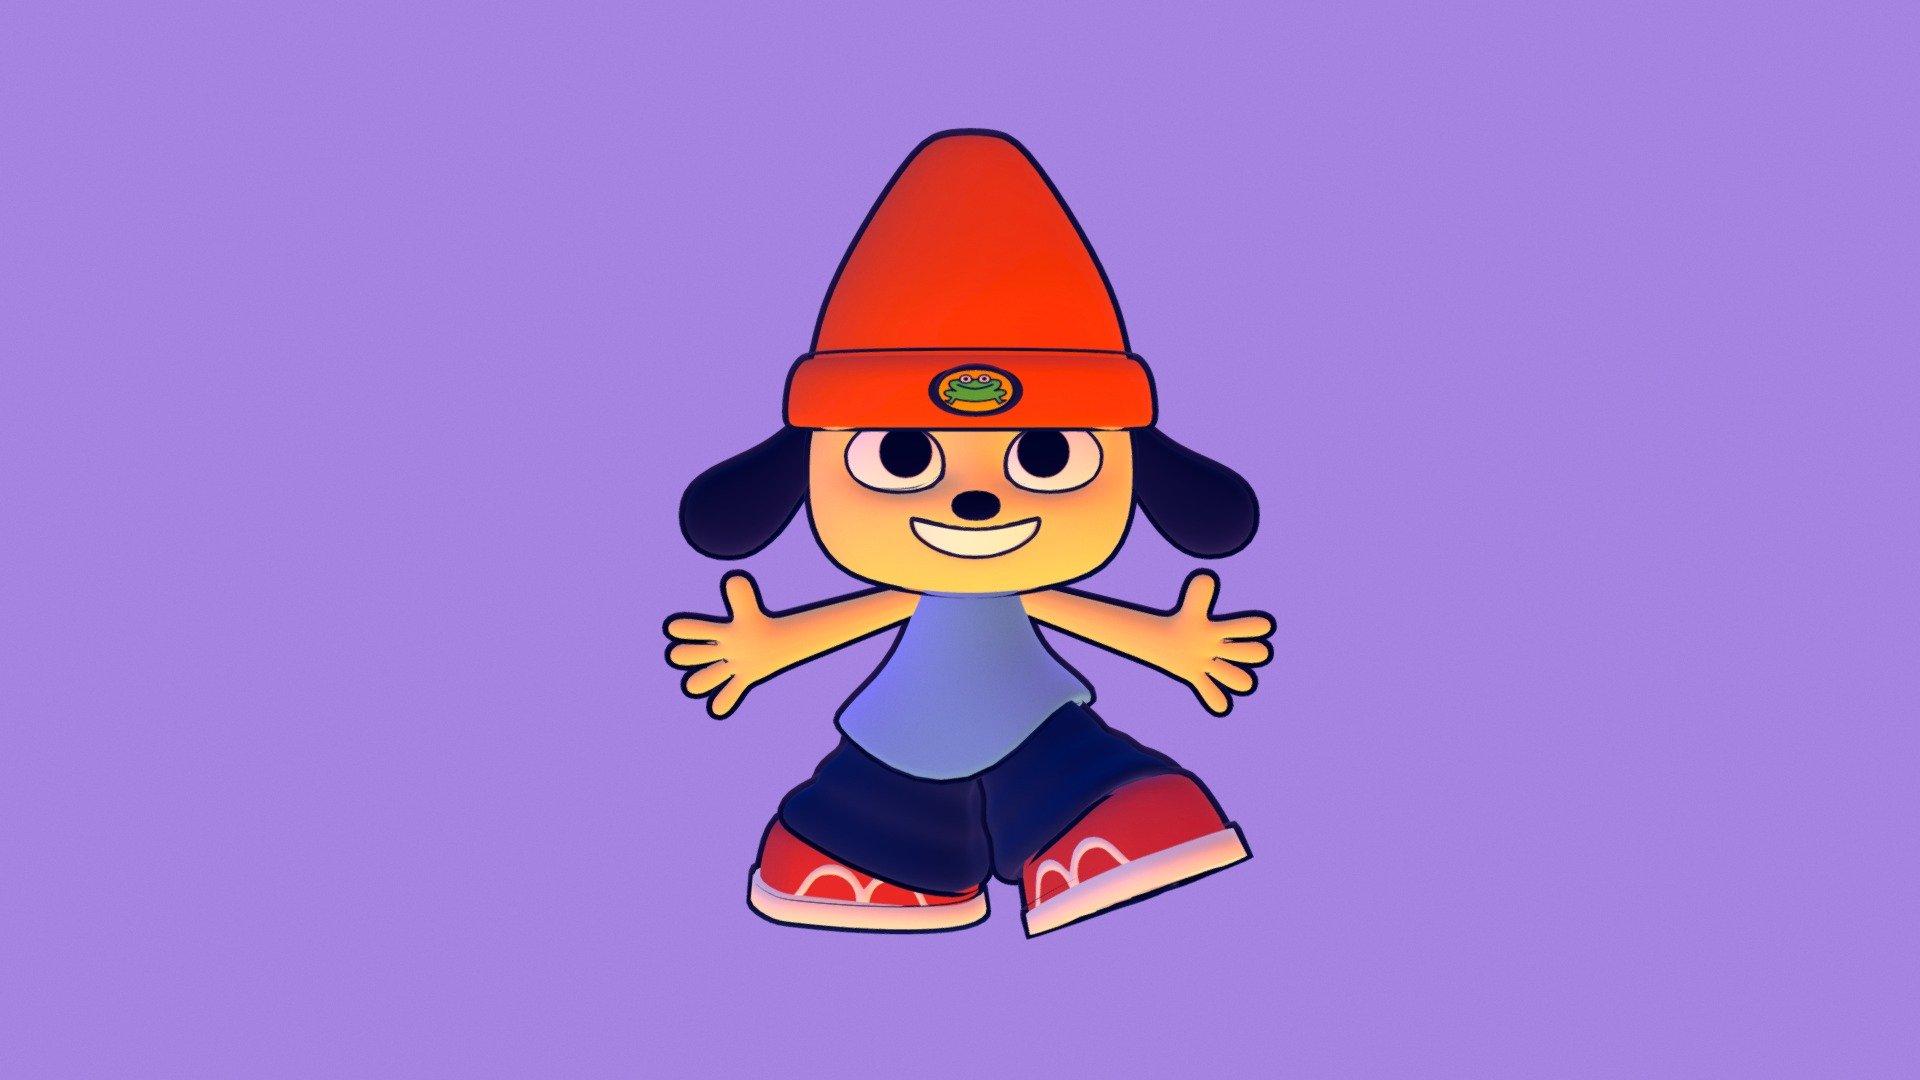 PaRappa the Rapper Animation on Behance